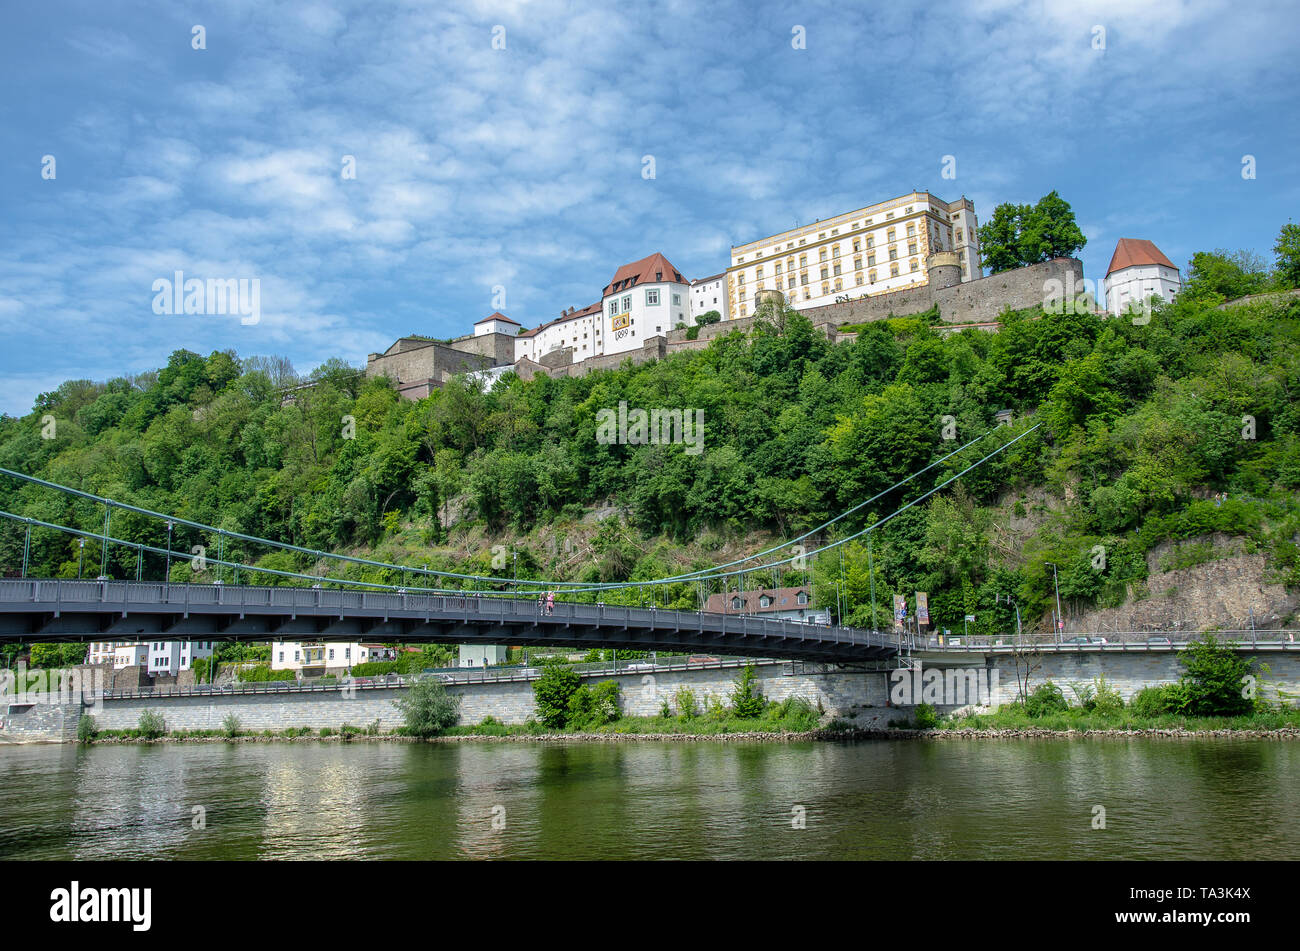 City of Three Rivers - One of the most beautiful cities in Germany, Passau is situated at the confluence of the rivers Danube, Inn and Ilz. Stock Photo